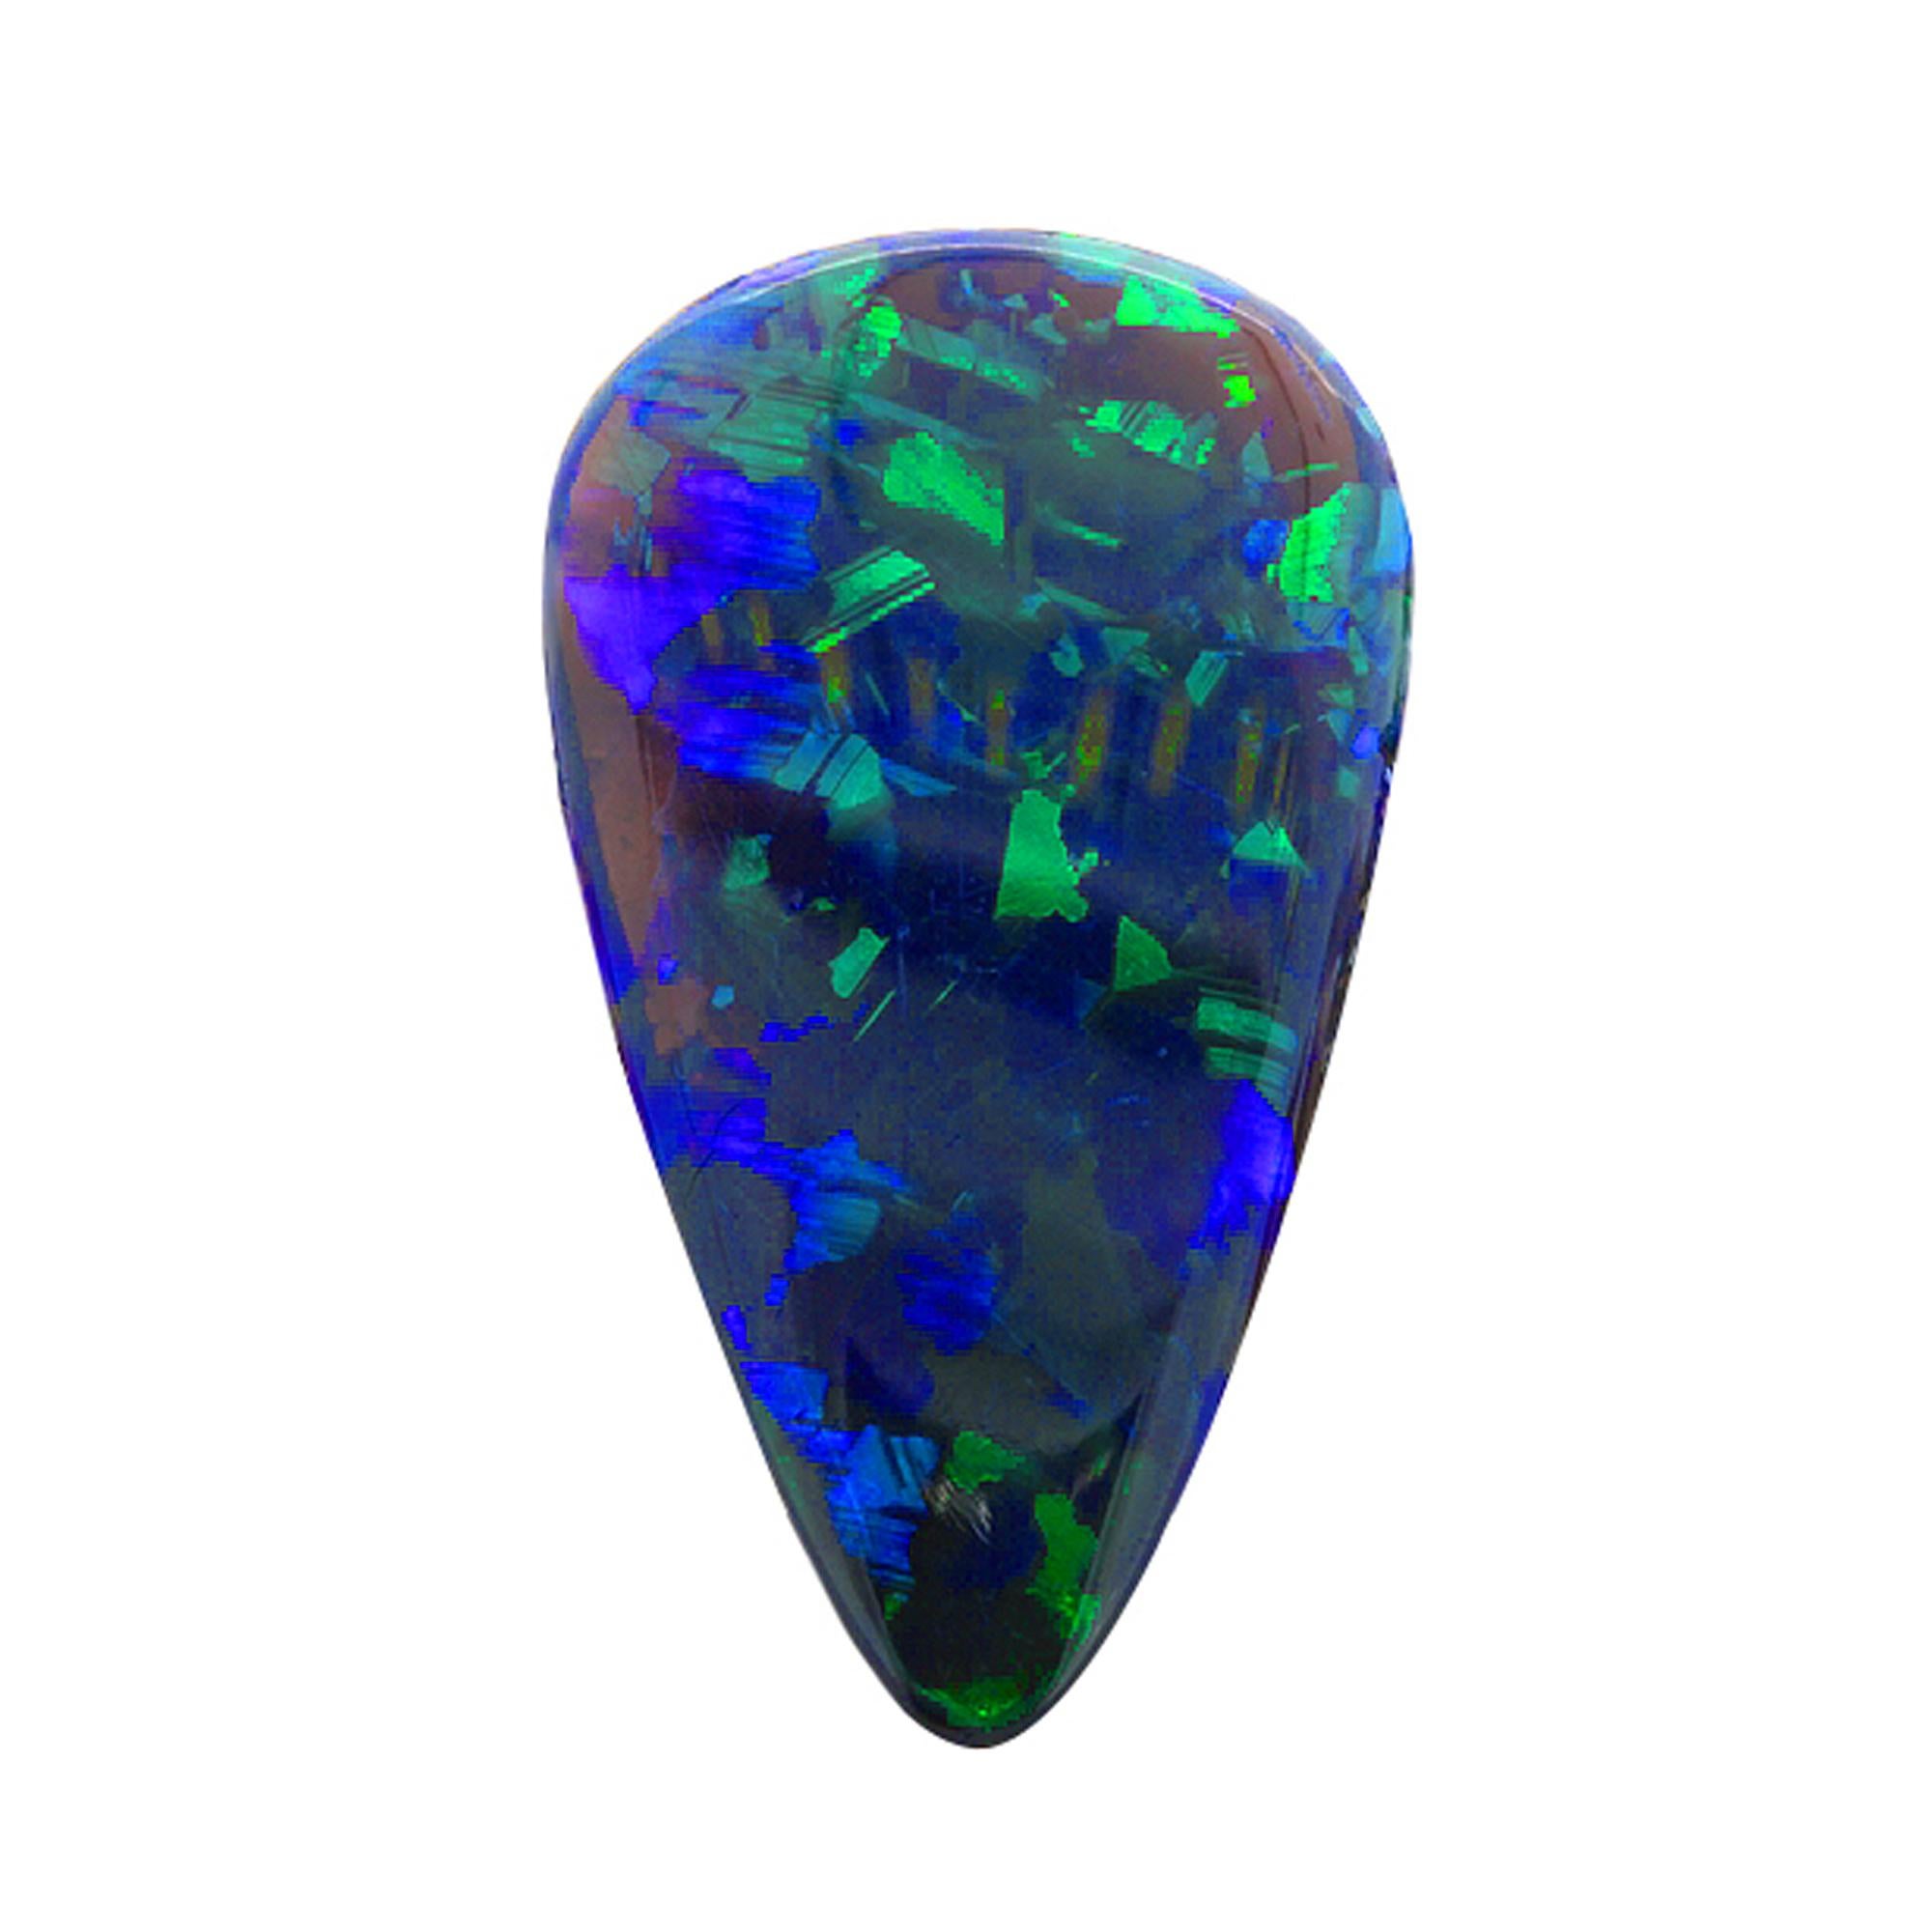 This pear-shape stunning Australian Black Opal displays a vivid Blue-Green Play-of-Color Phenomena in a unique Chaff and Harlequin Jigsaw pattern! This gem weighs 8.11ct and measures 21.98x12.40x5.43mm. 